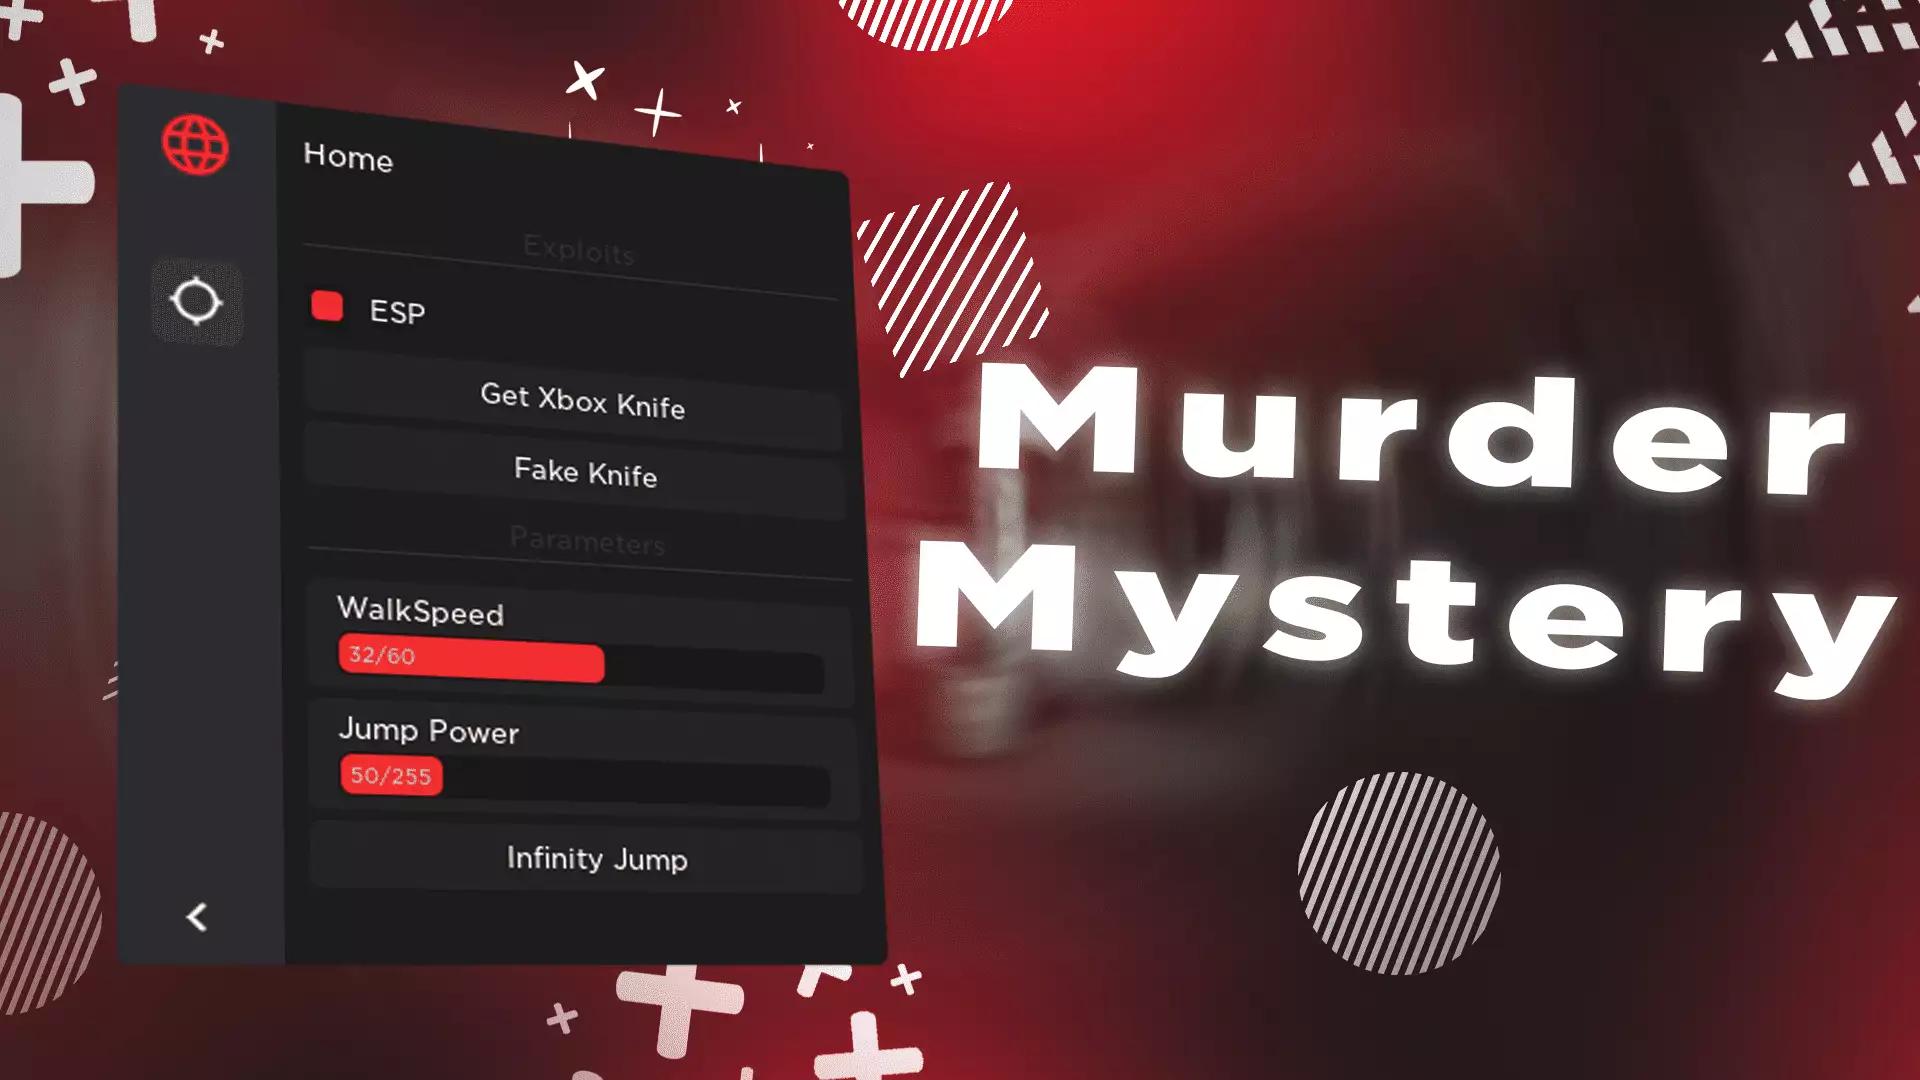 Preview of Murder Mystery 2: ESP, Fake Knife, Get Xbox Knife